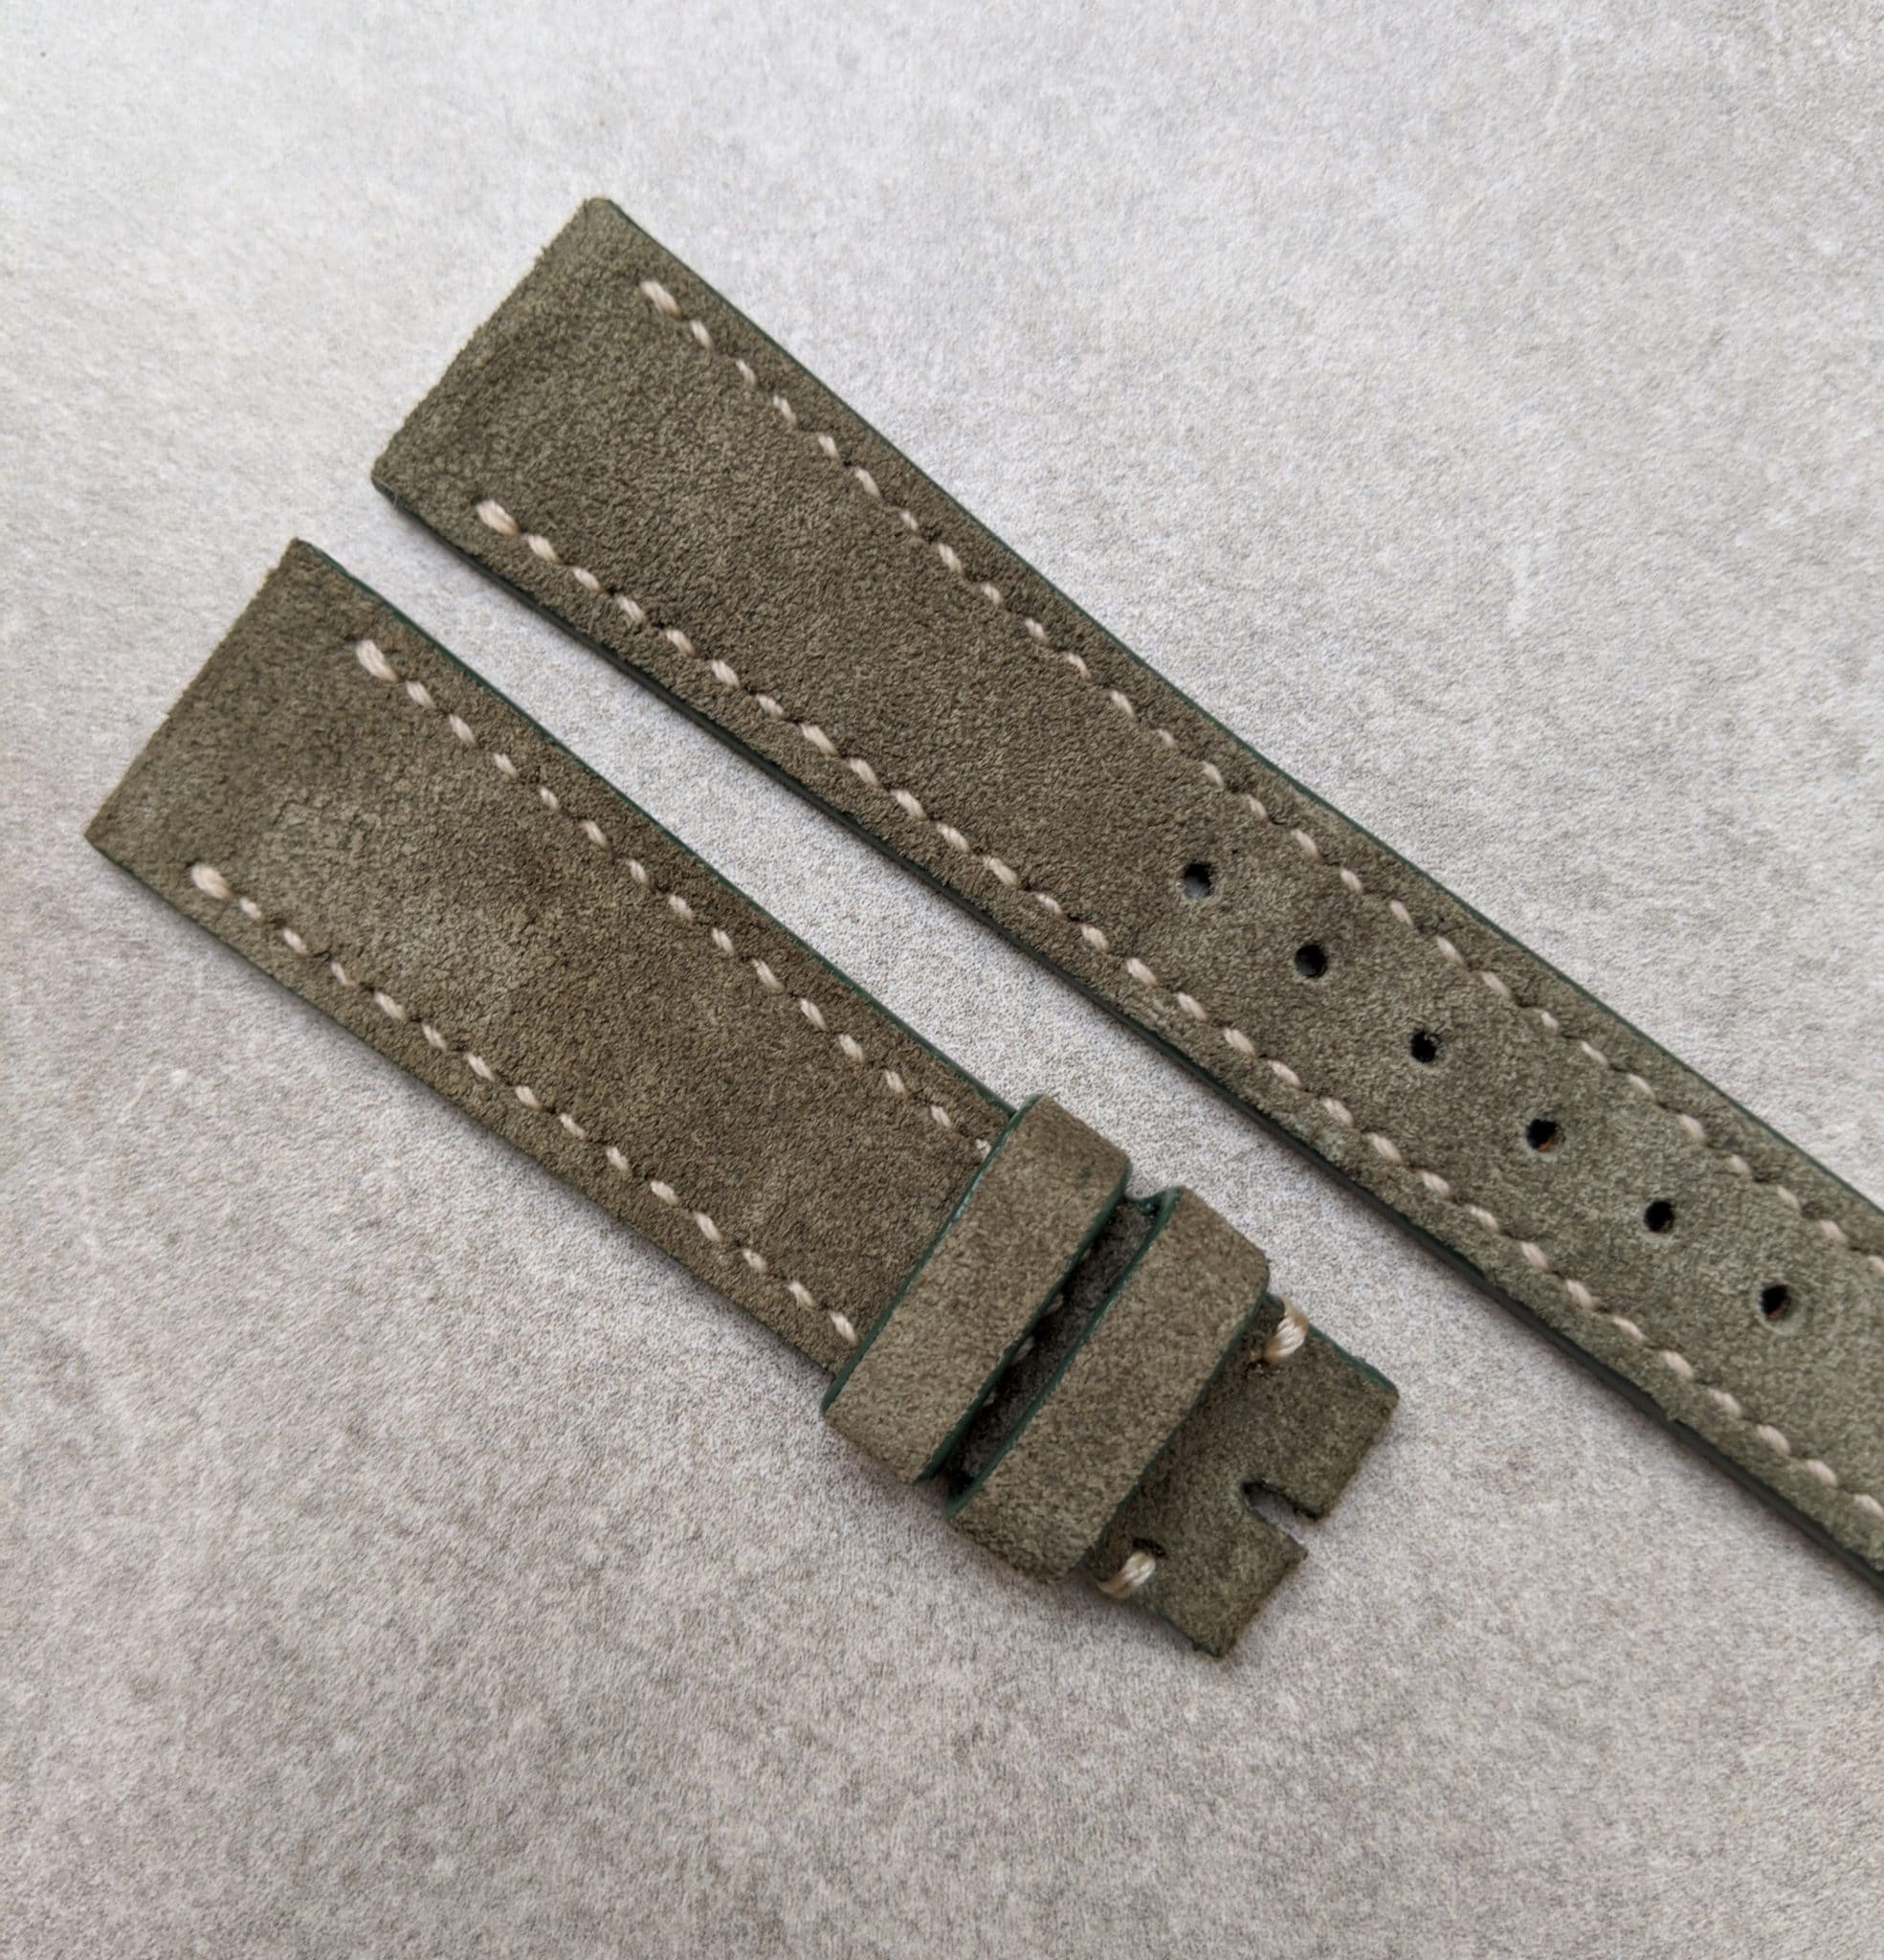 Stitched Suede Strap - Olive Green - The Strap Tailor